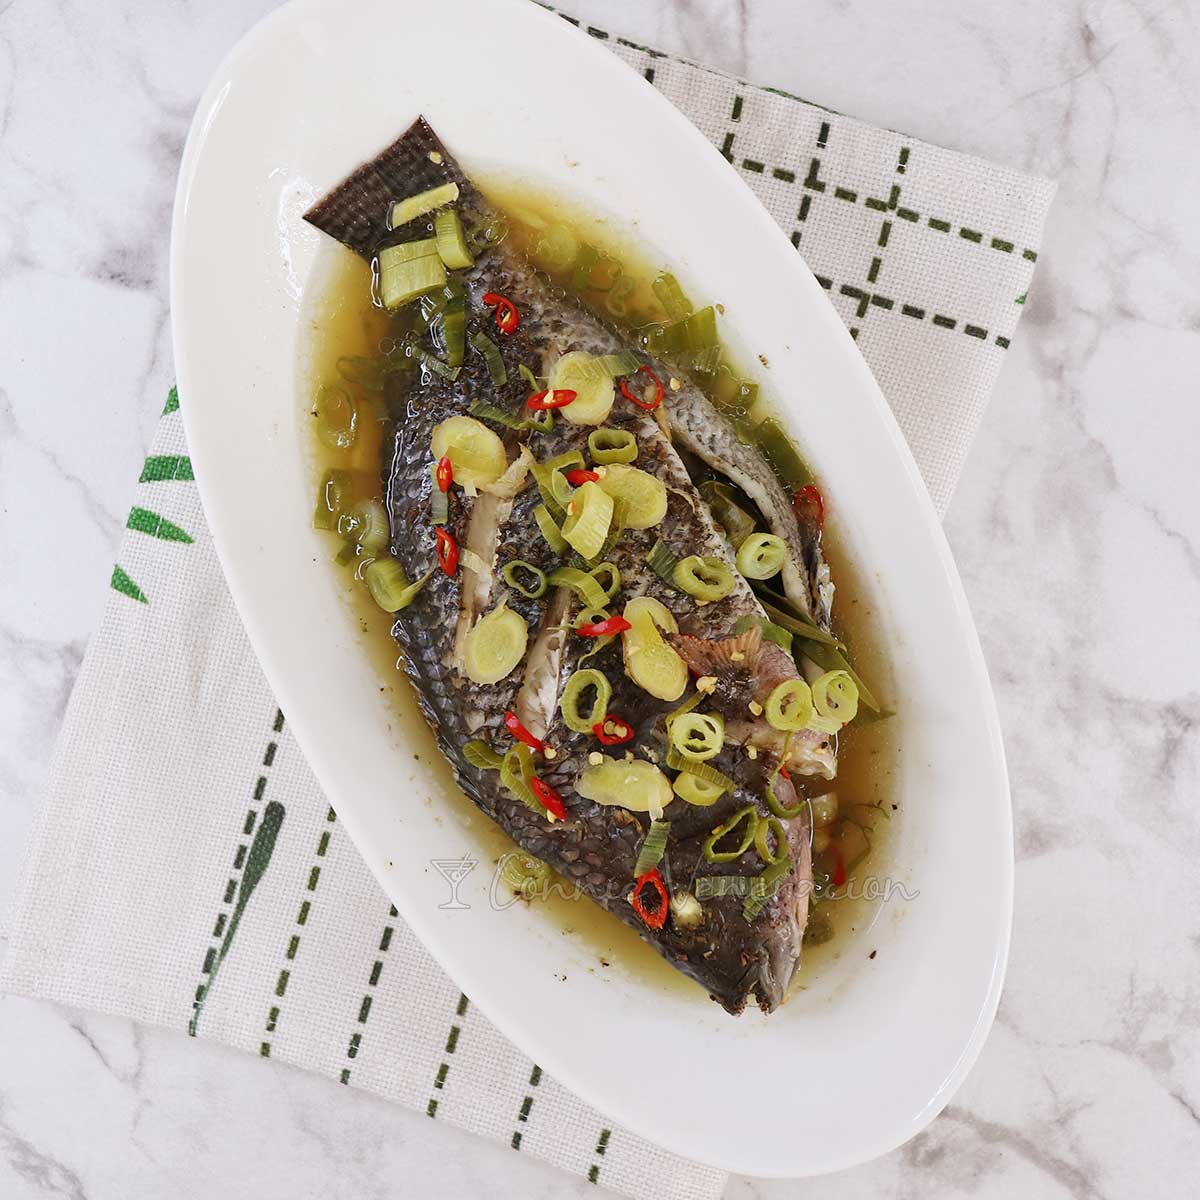 Steamed whole tilapia with ginger, scallions and chilies